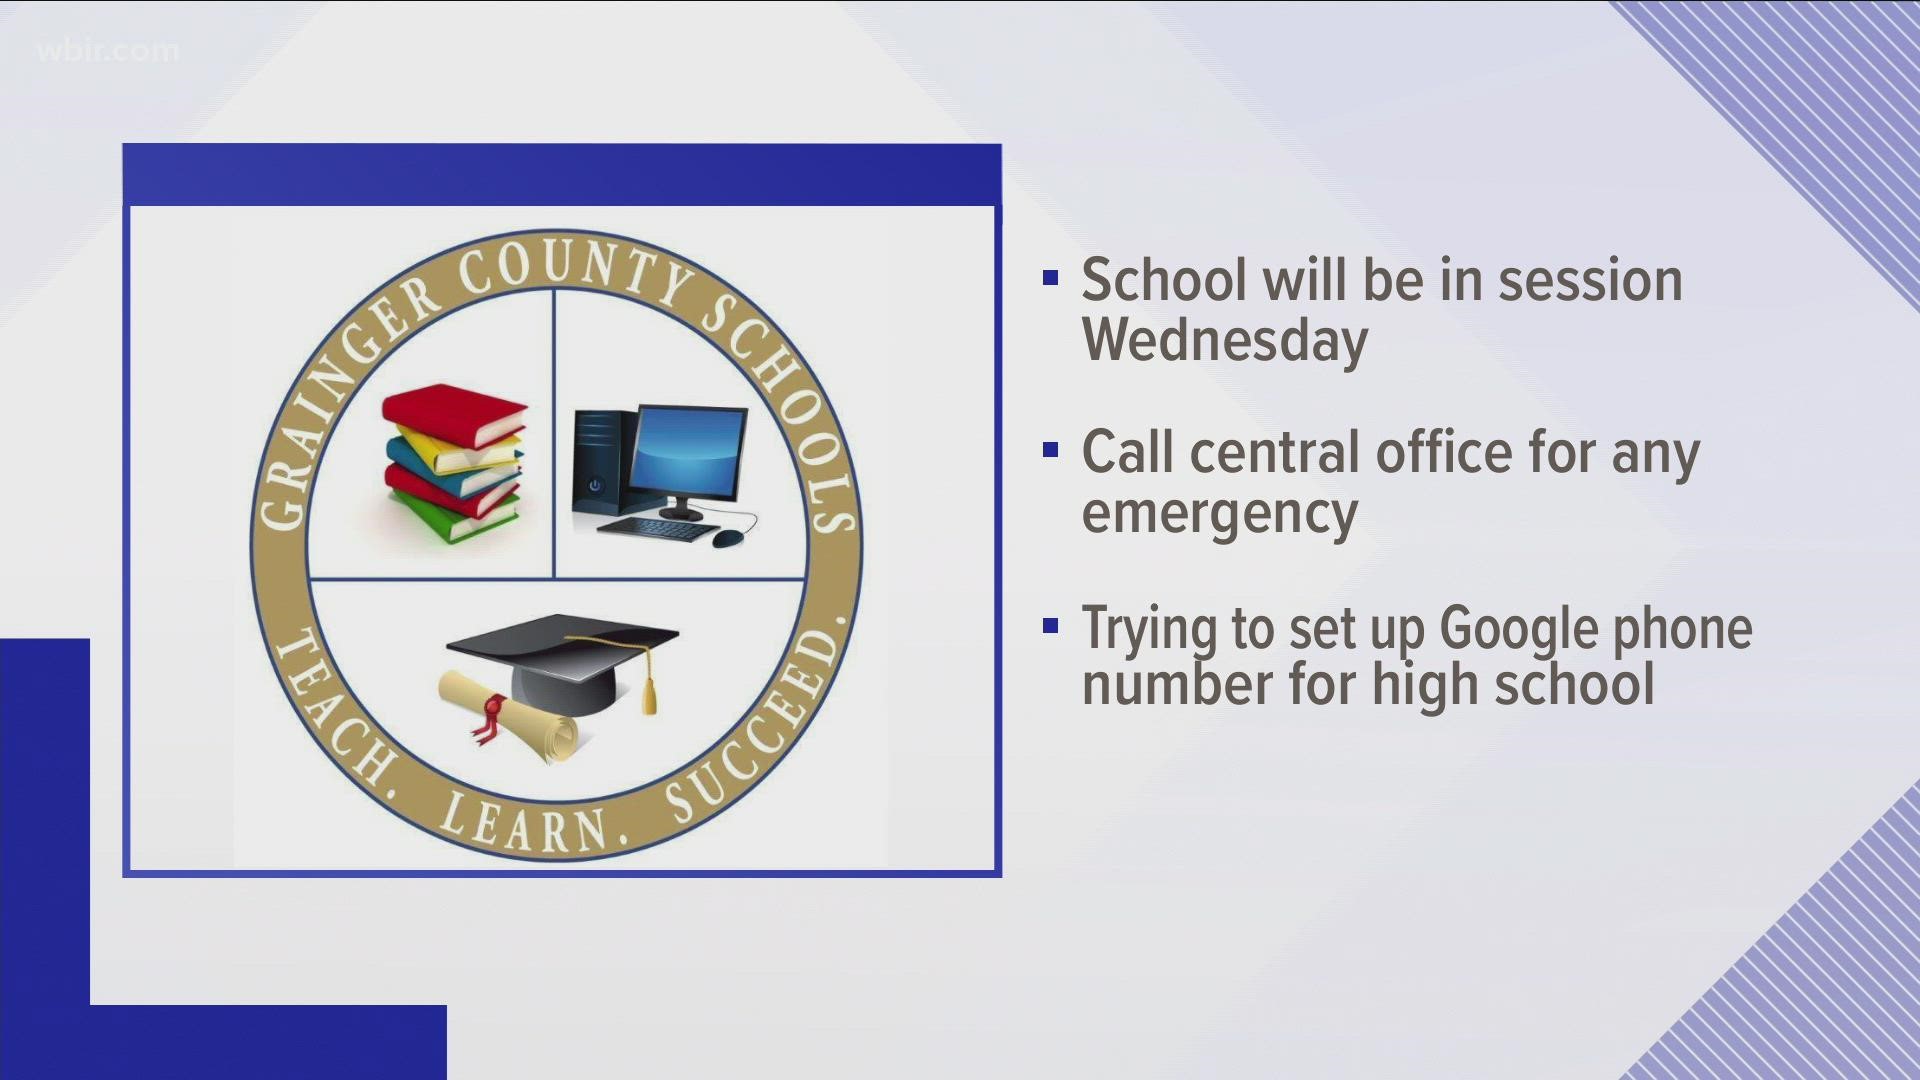 School will be in session Wednesday for Grainger County High School, but the school's phone system will be down.